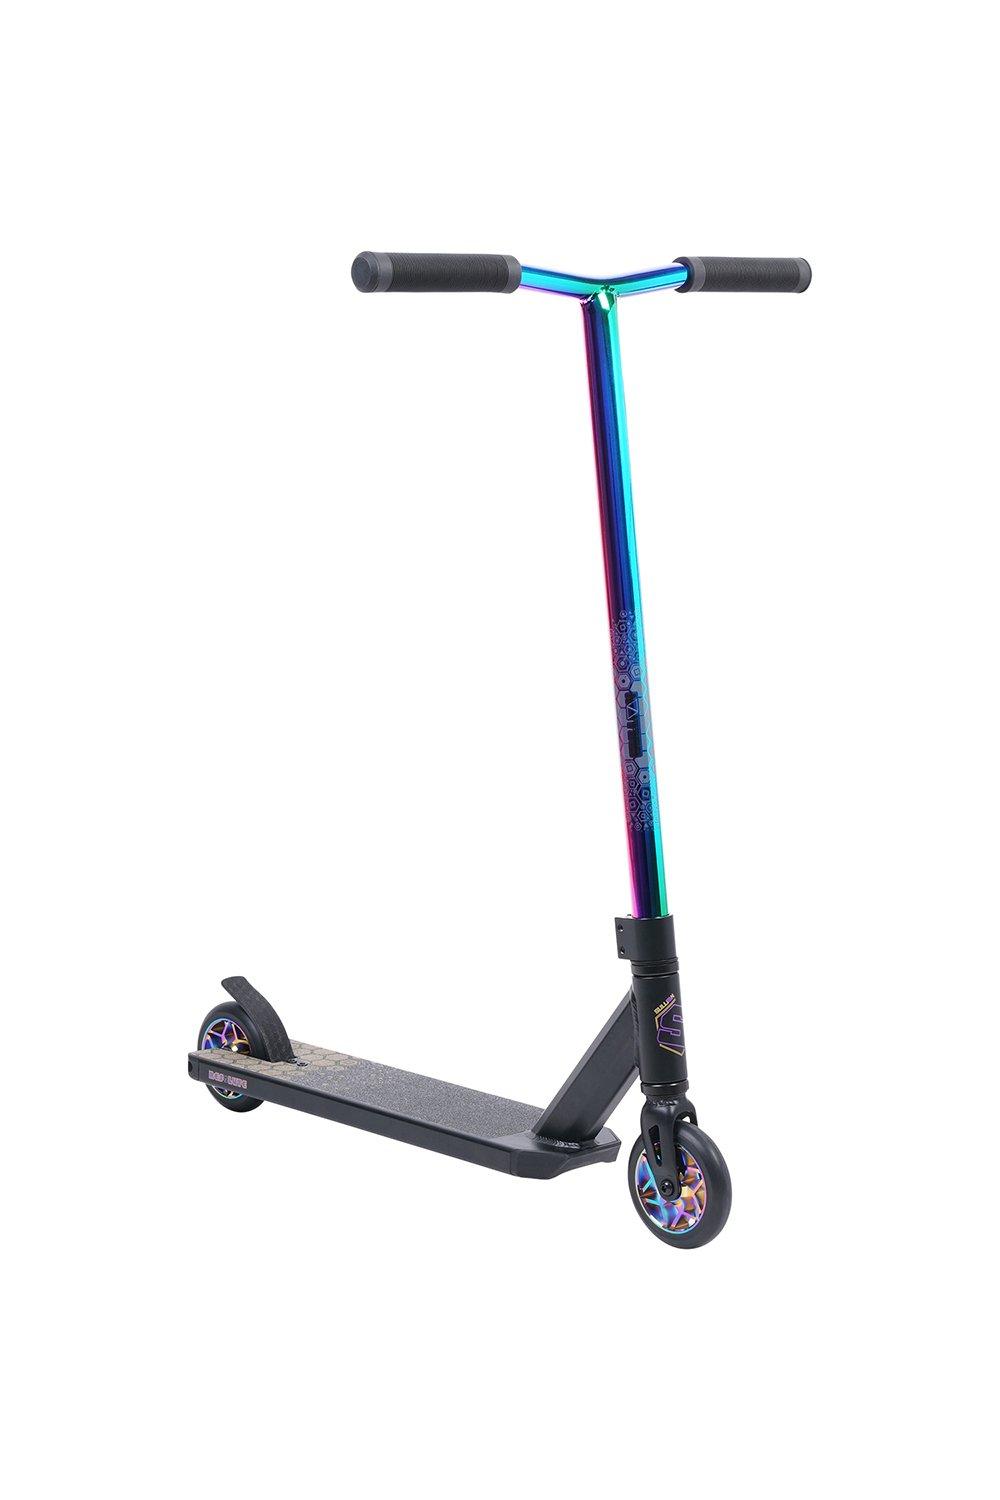 Resolute Stunt Scooter